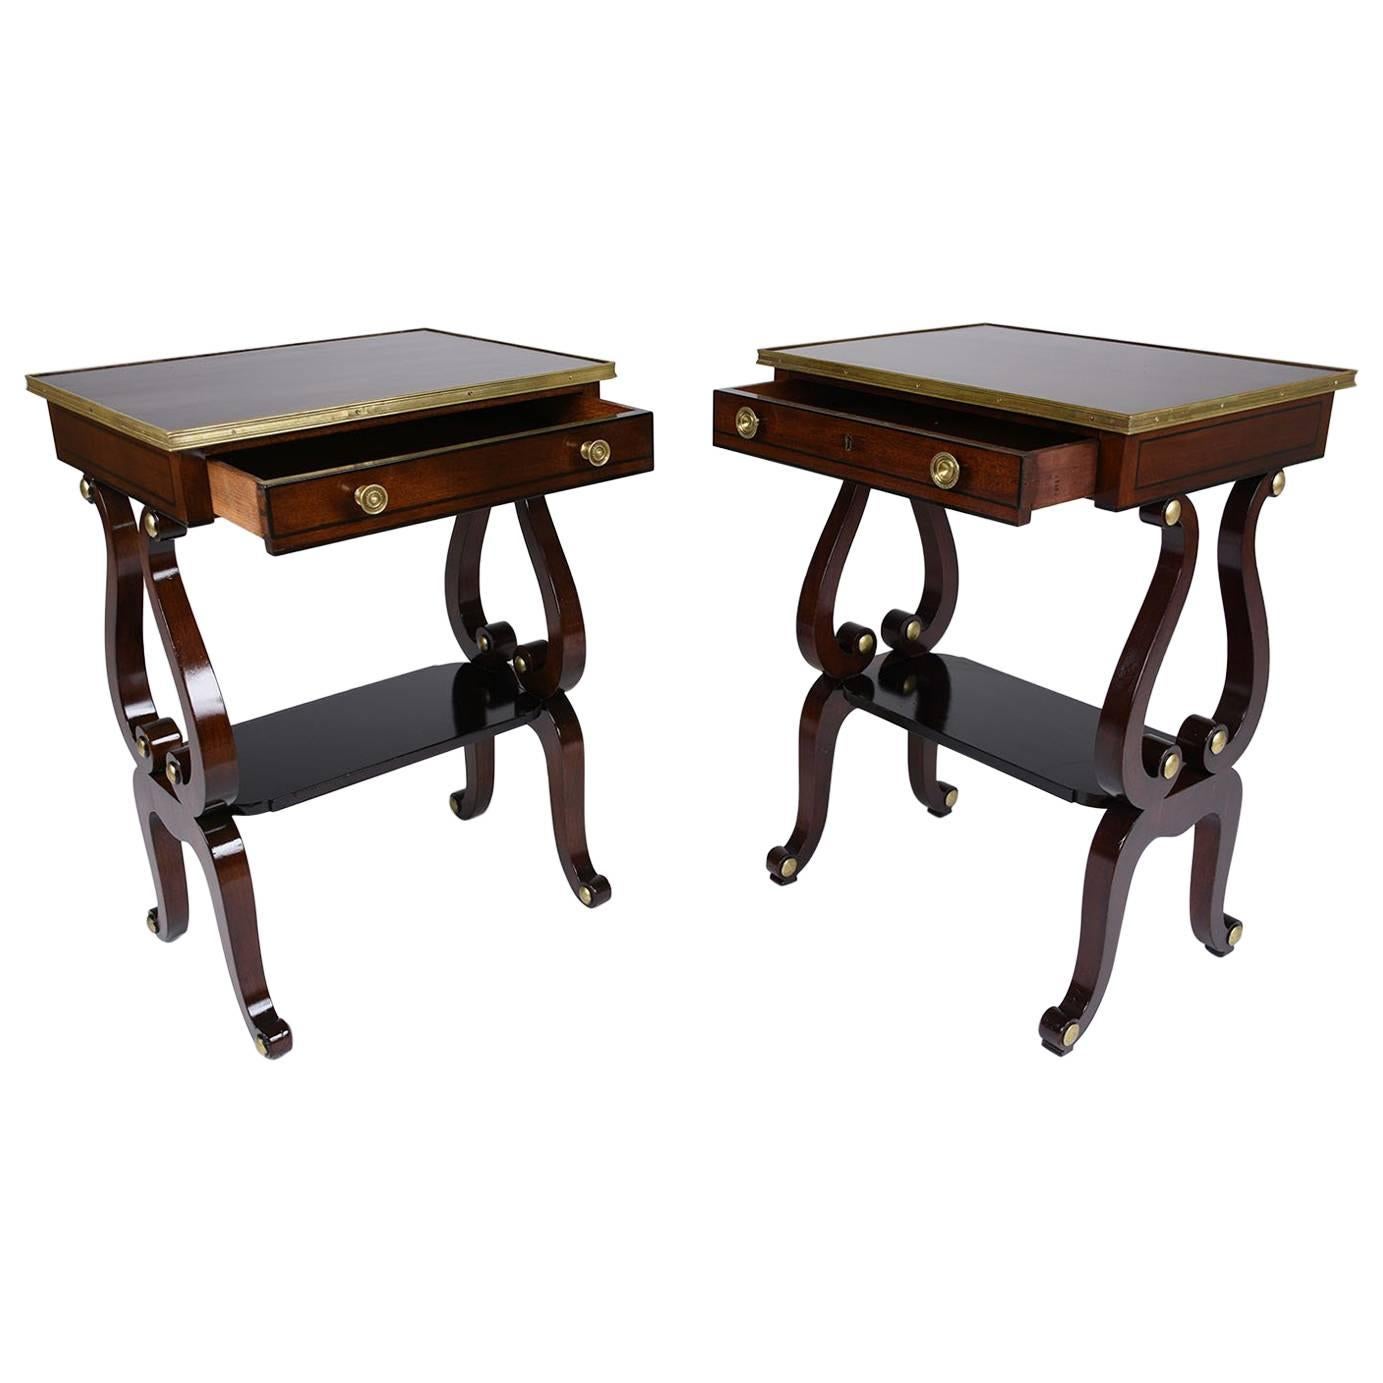 Pair of English Regency Style Side Tables